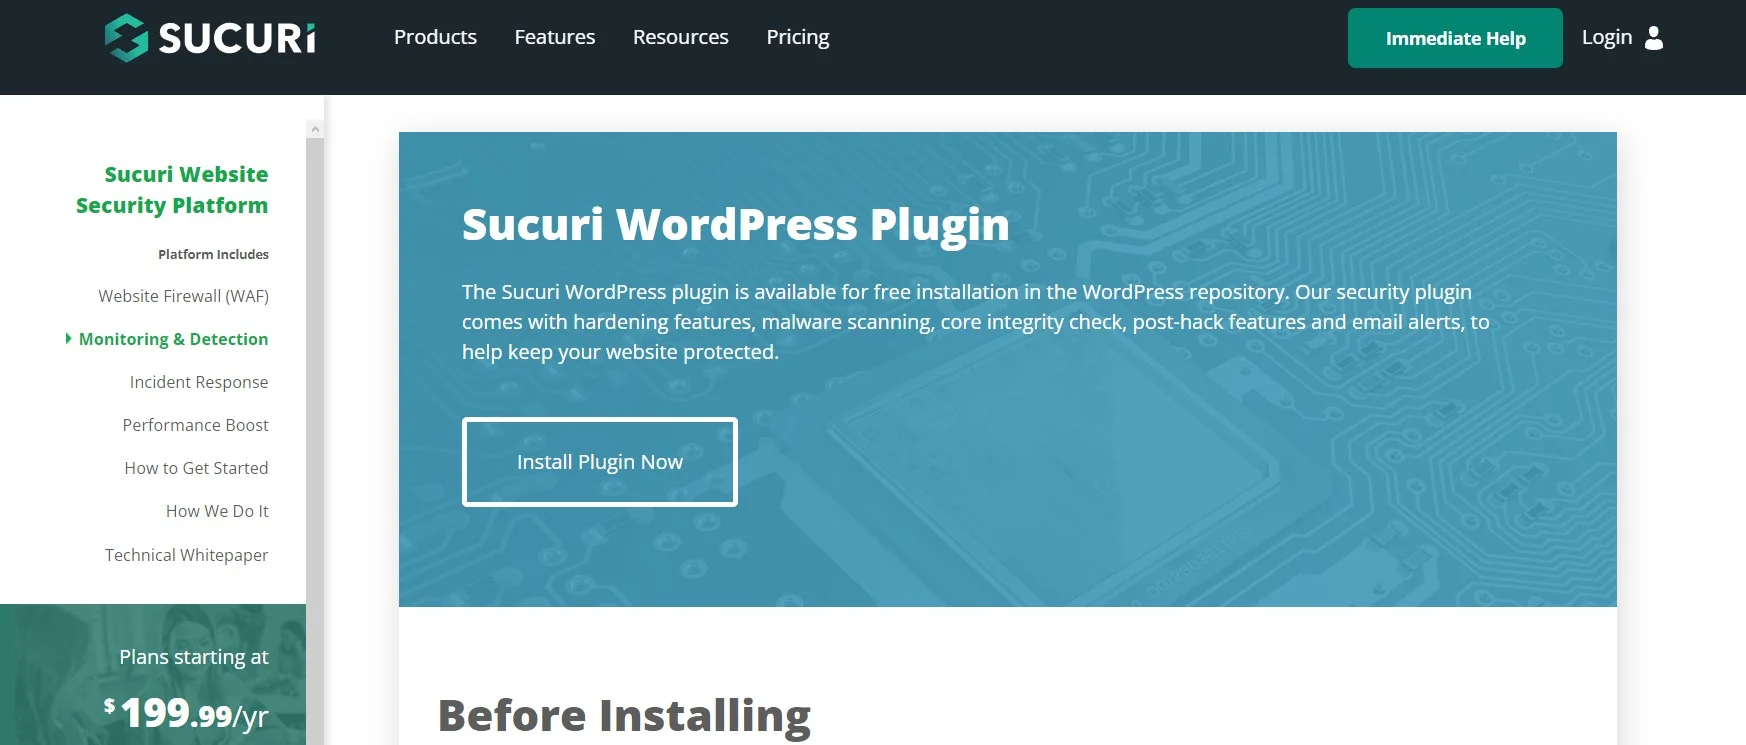 Sucuri Malware Removal Plugin Is A Popular Choice For Securing Wordpress Websites And Protecting Them From Malicious Server Attacks.webp